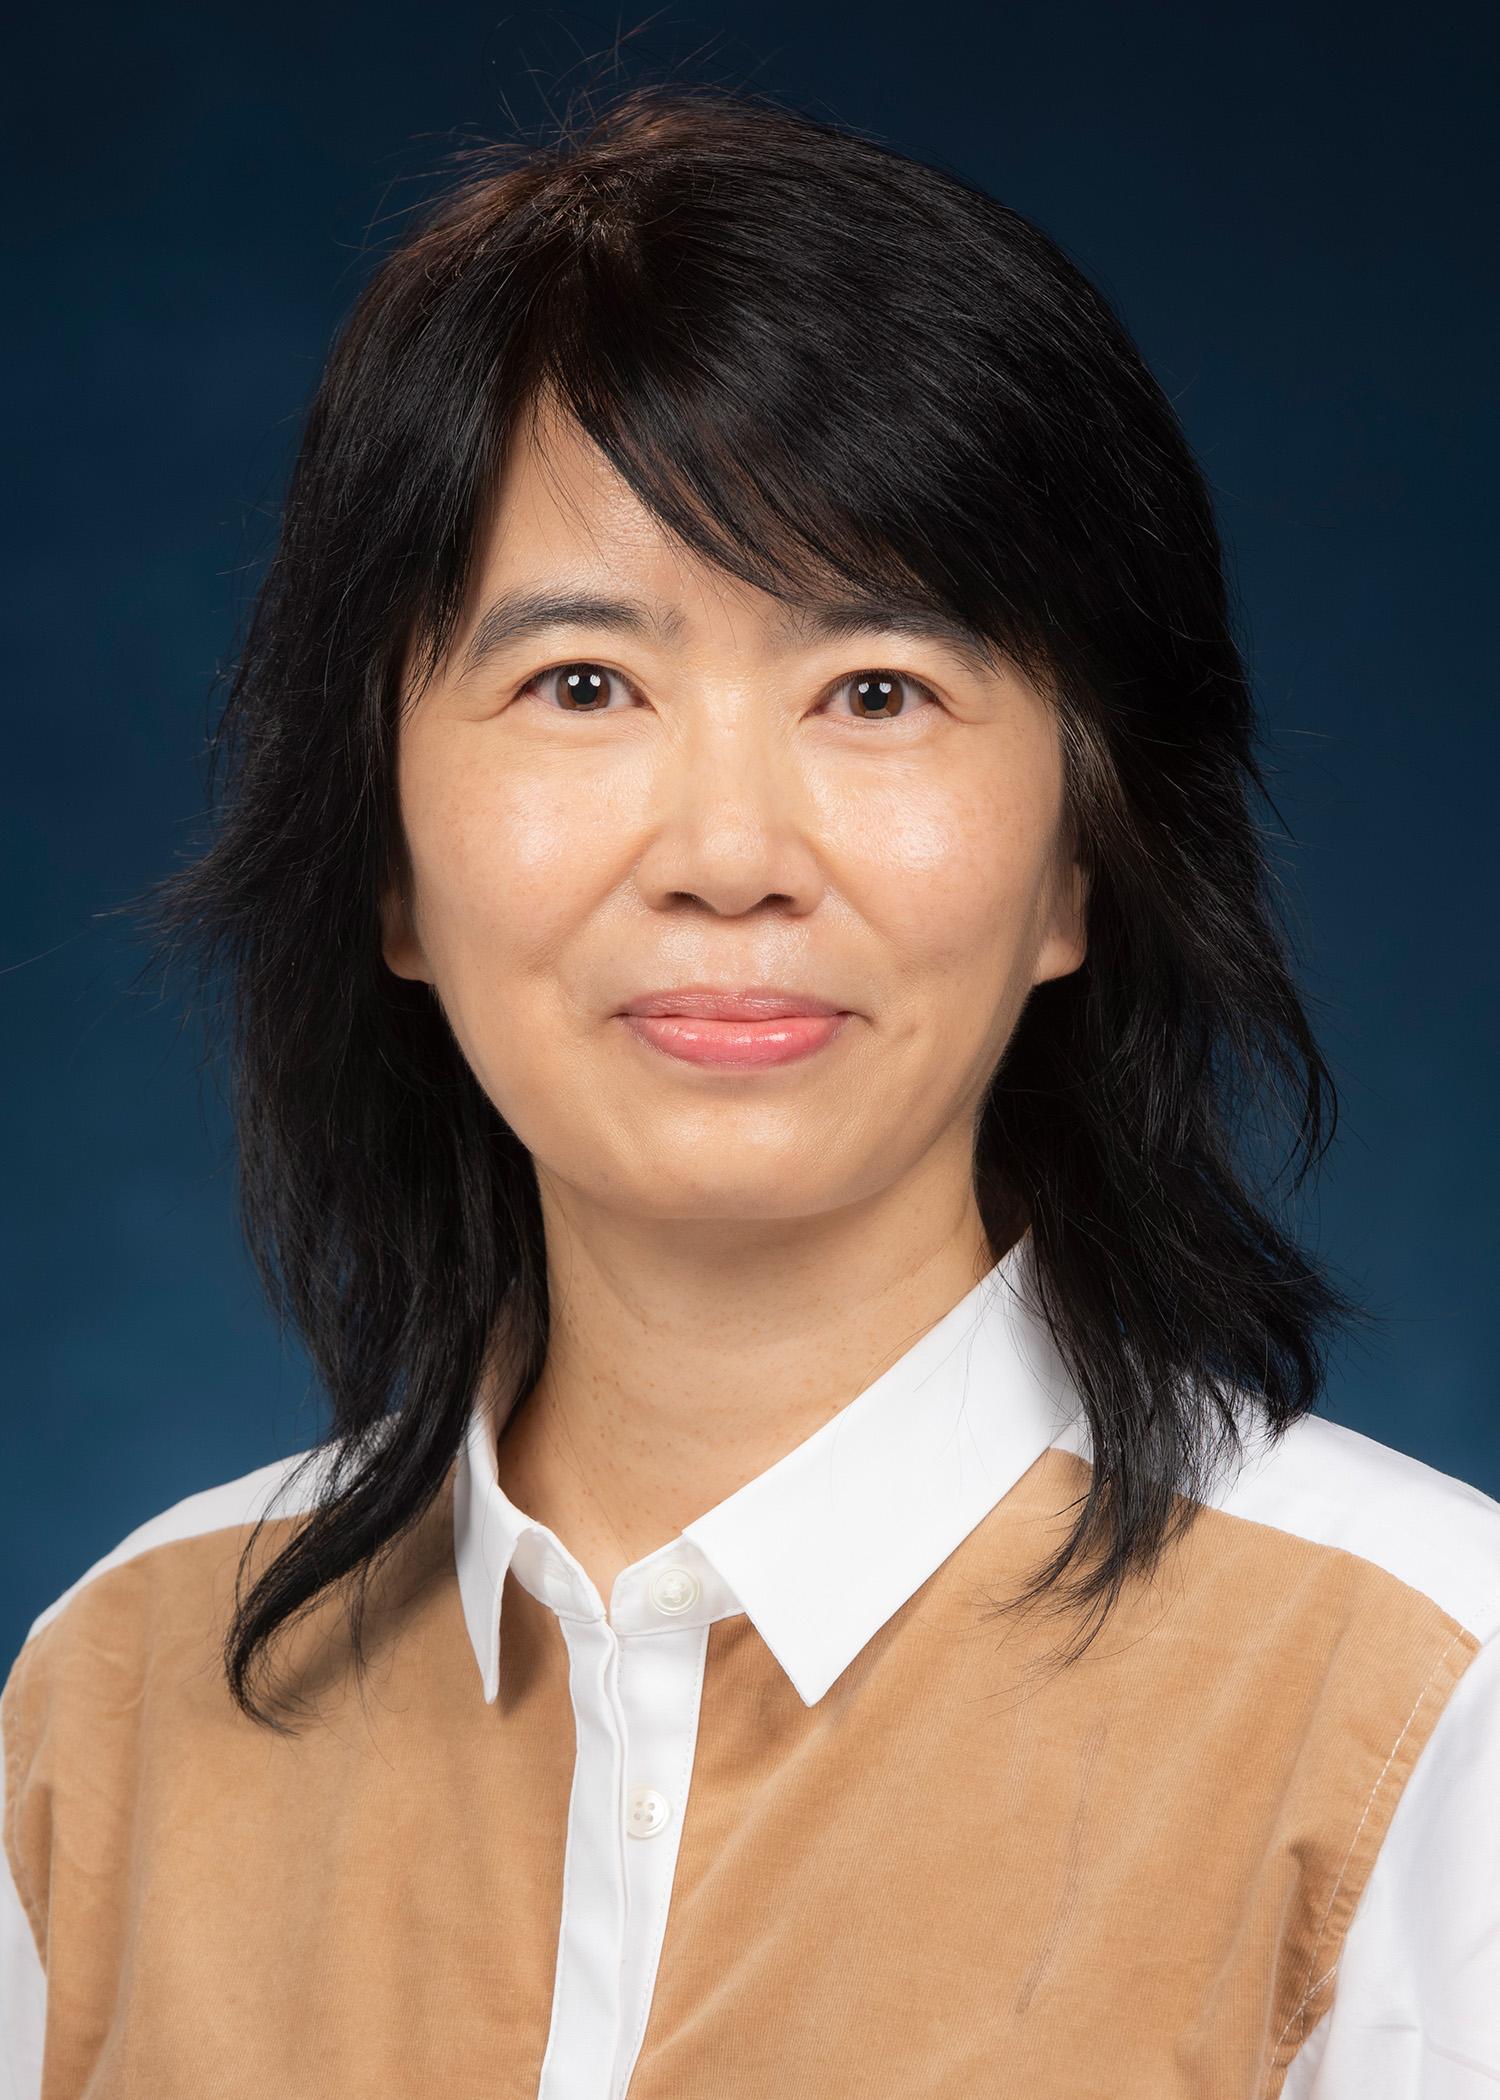 Ms Doris Ho Pui-ling, Head, Policy Innovation and Co-ordination Office, will assume the post of Permanent Secretary for Development (Planning and Lands) in the fourth quarter of 2022 (date to be further announced).